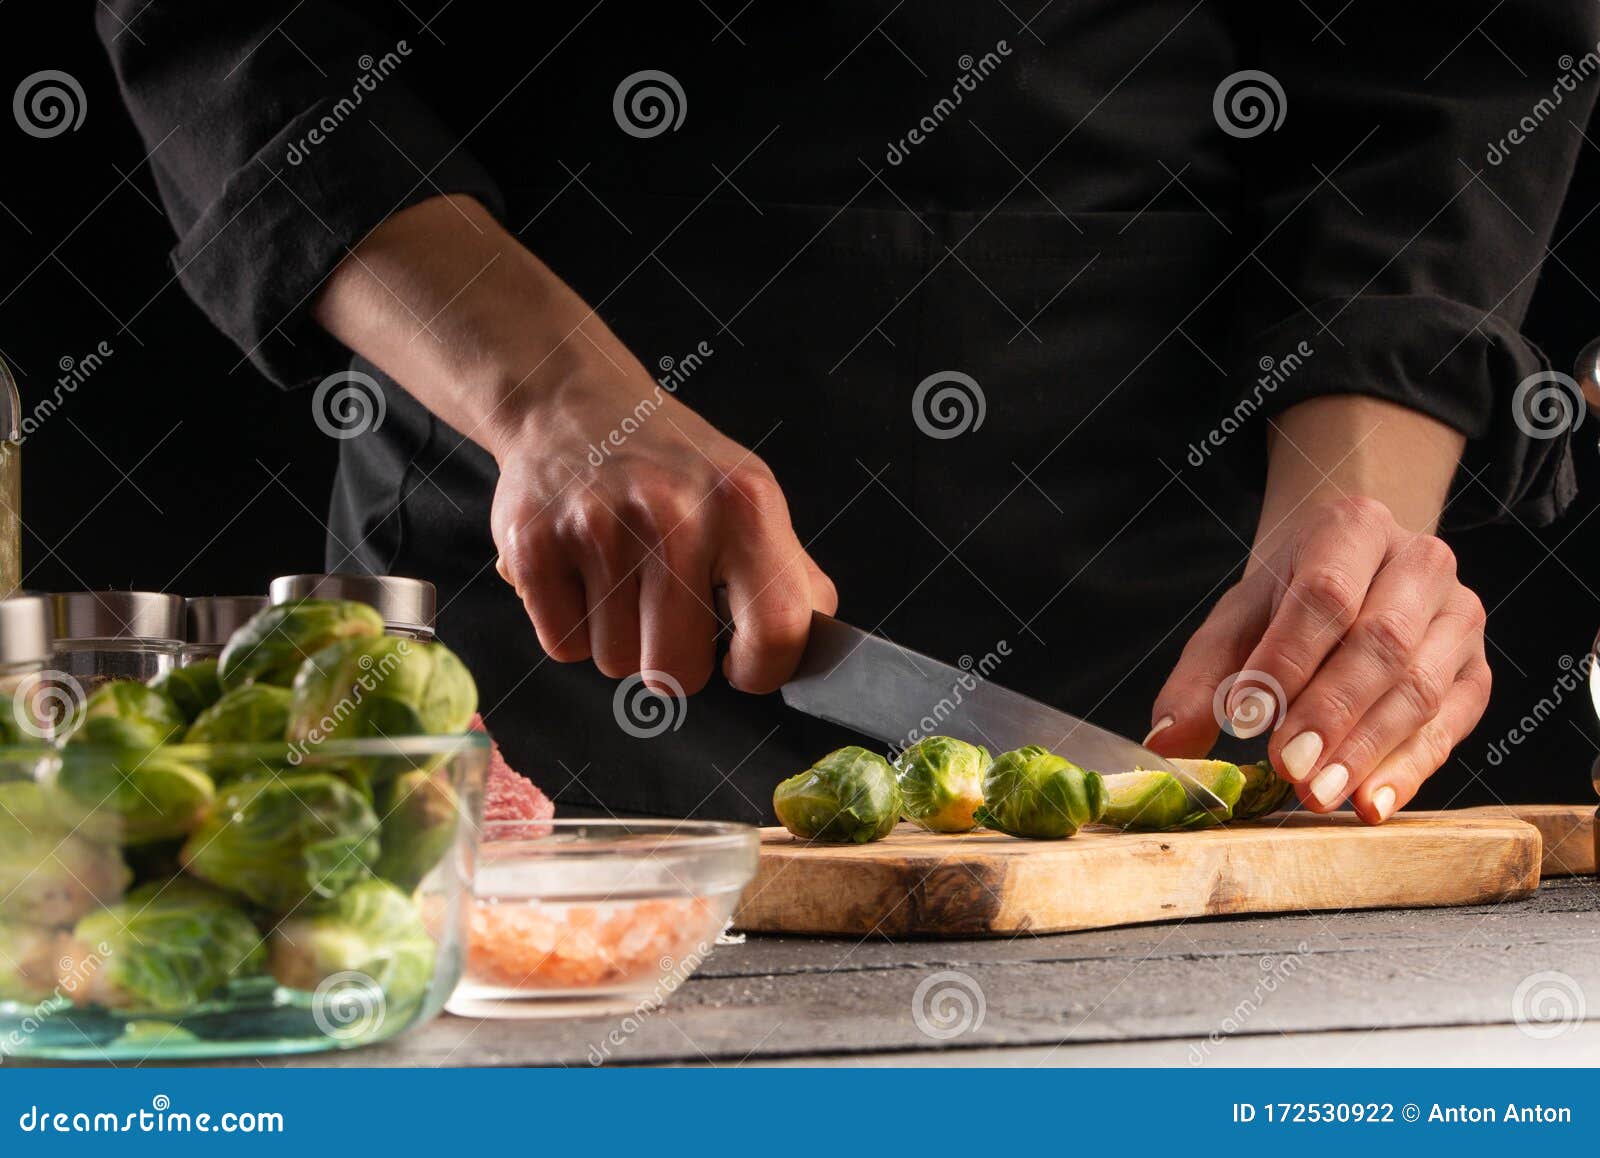 Cooking Salad Or Sauce By A Cook Cutting Brussels Sprouts On A Black Background Horizontal Photo Advertising Cooking Recipe Stock Photo Image Of Ingredients Cookery 172530922